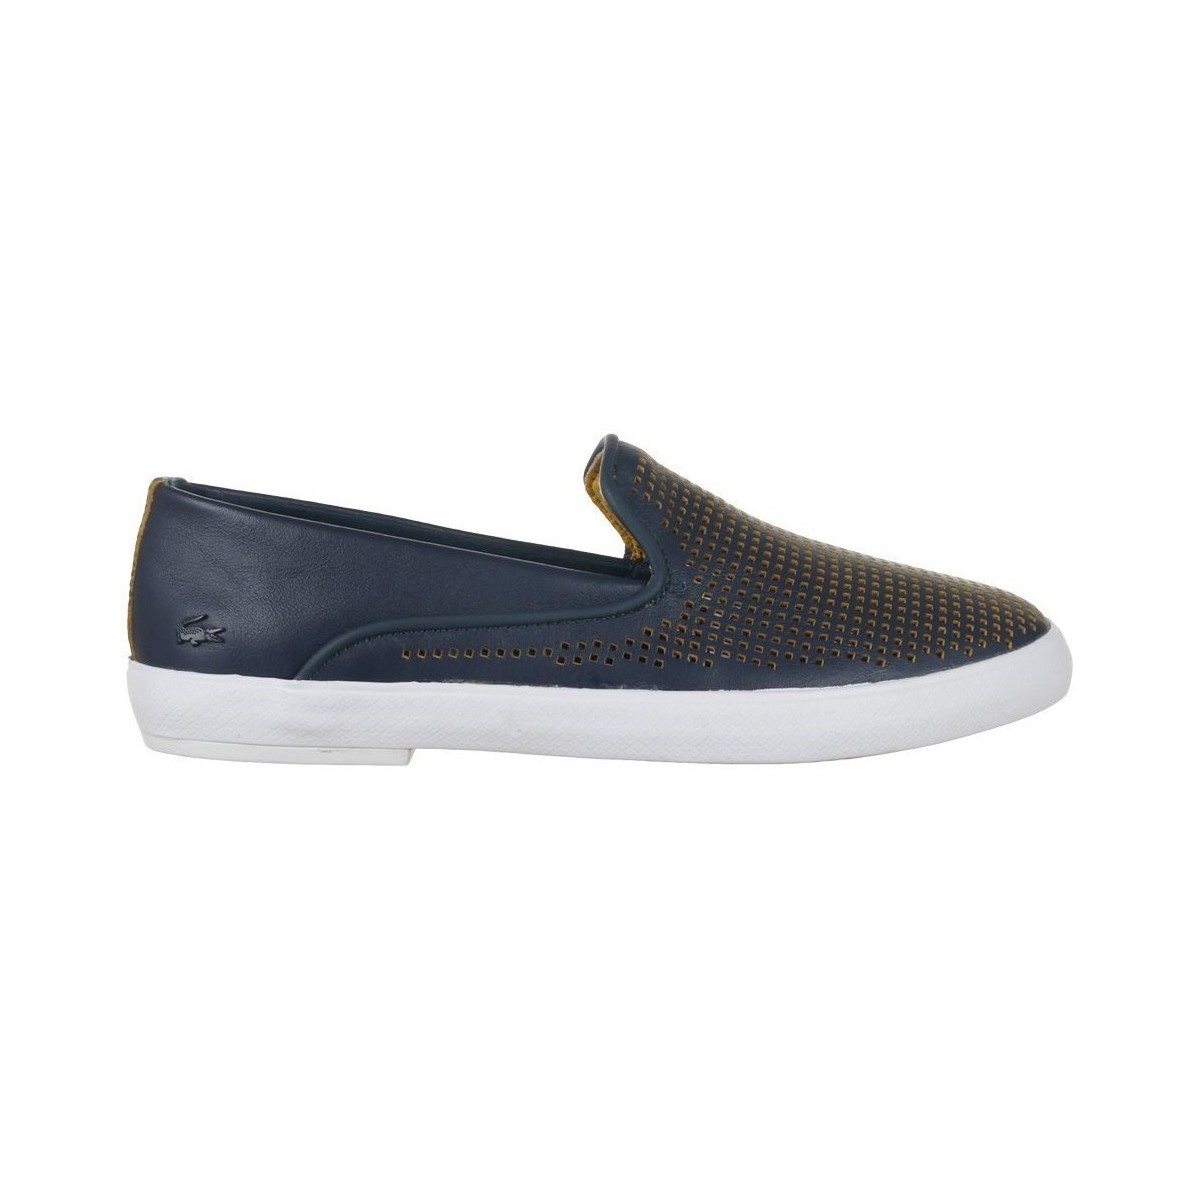 lacoste  cherre 216 1 caw  women's shoes (trainers) in marine